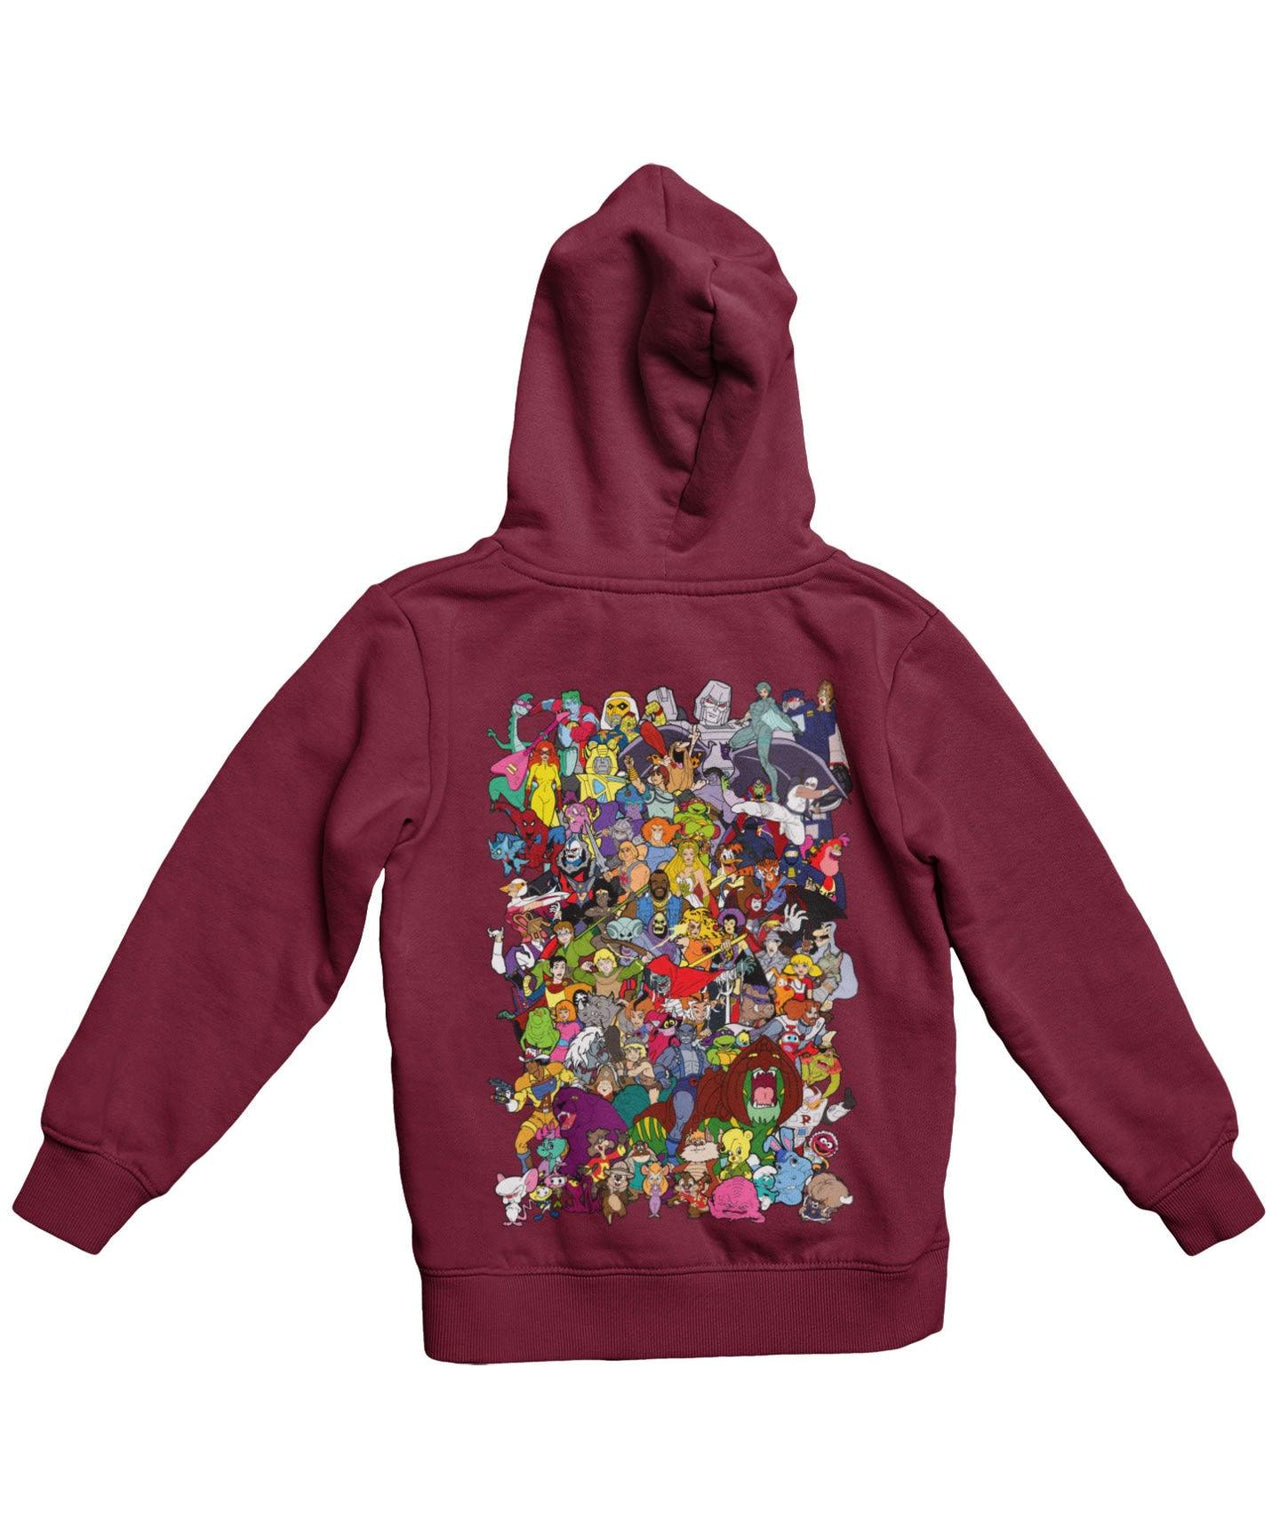 Top Notchy Saturday Morning Cartoons Back Printed Hoodie For Men and Women 8Ball